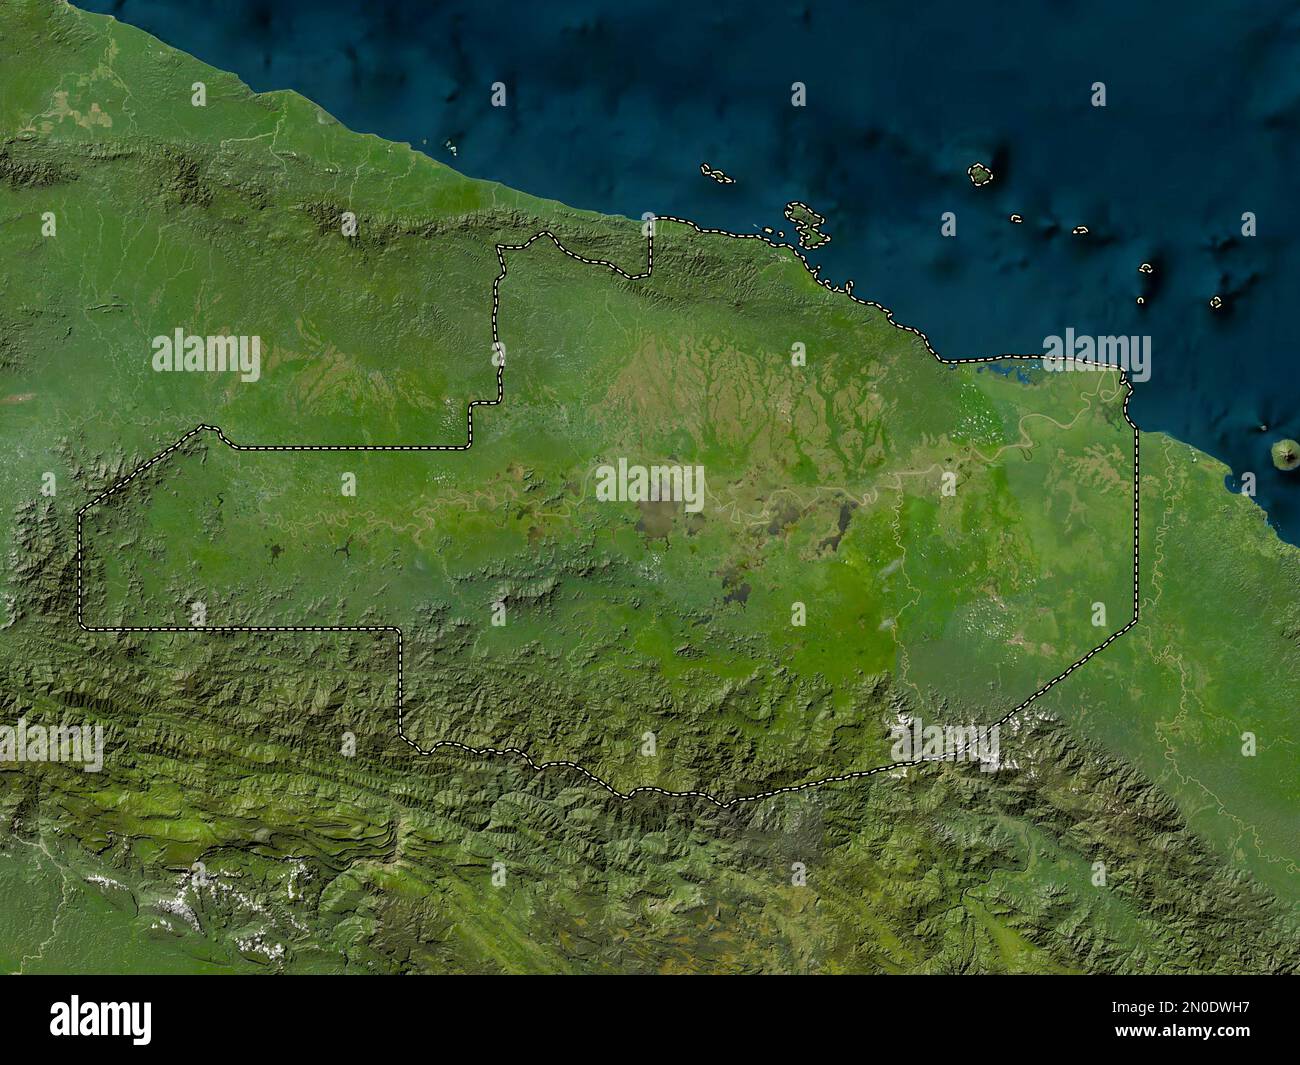 East Sepik, province of Papua New Guinea. Low resolution satellite map Stock Photo